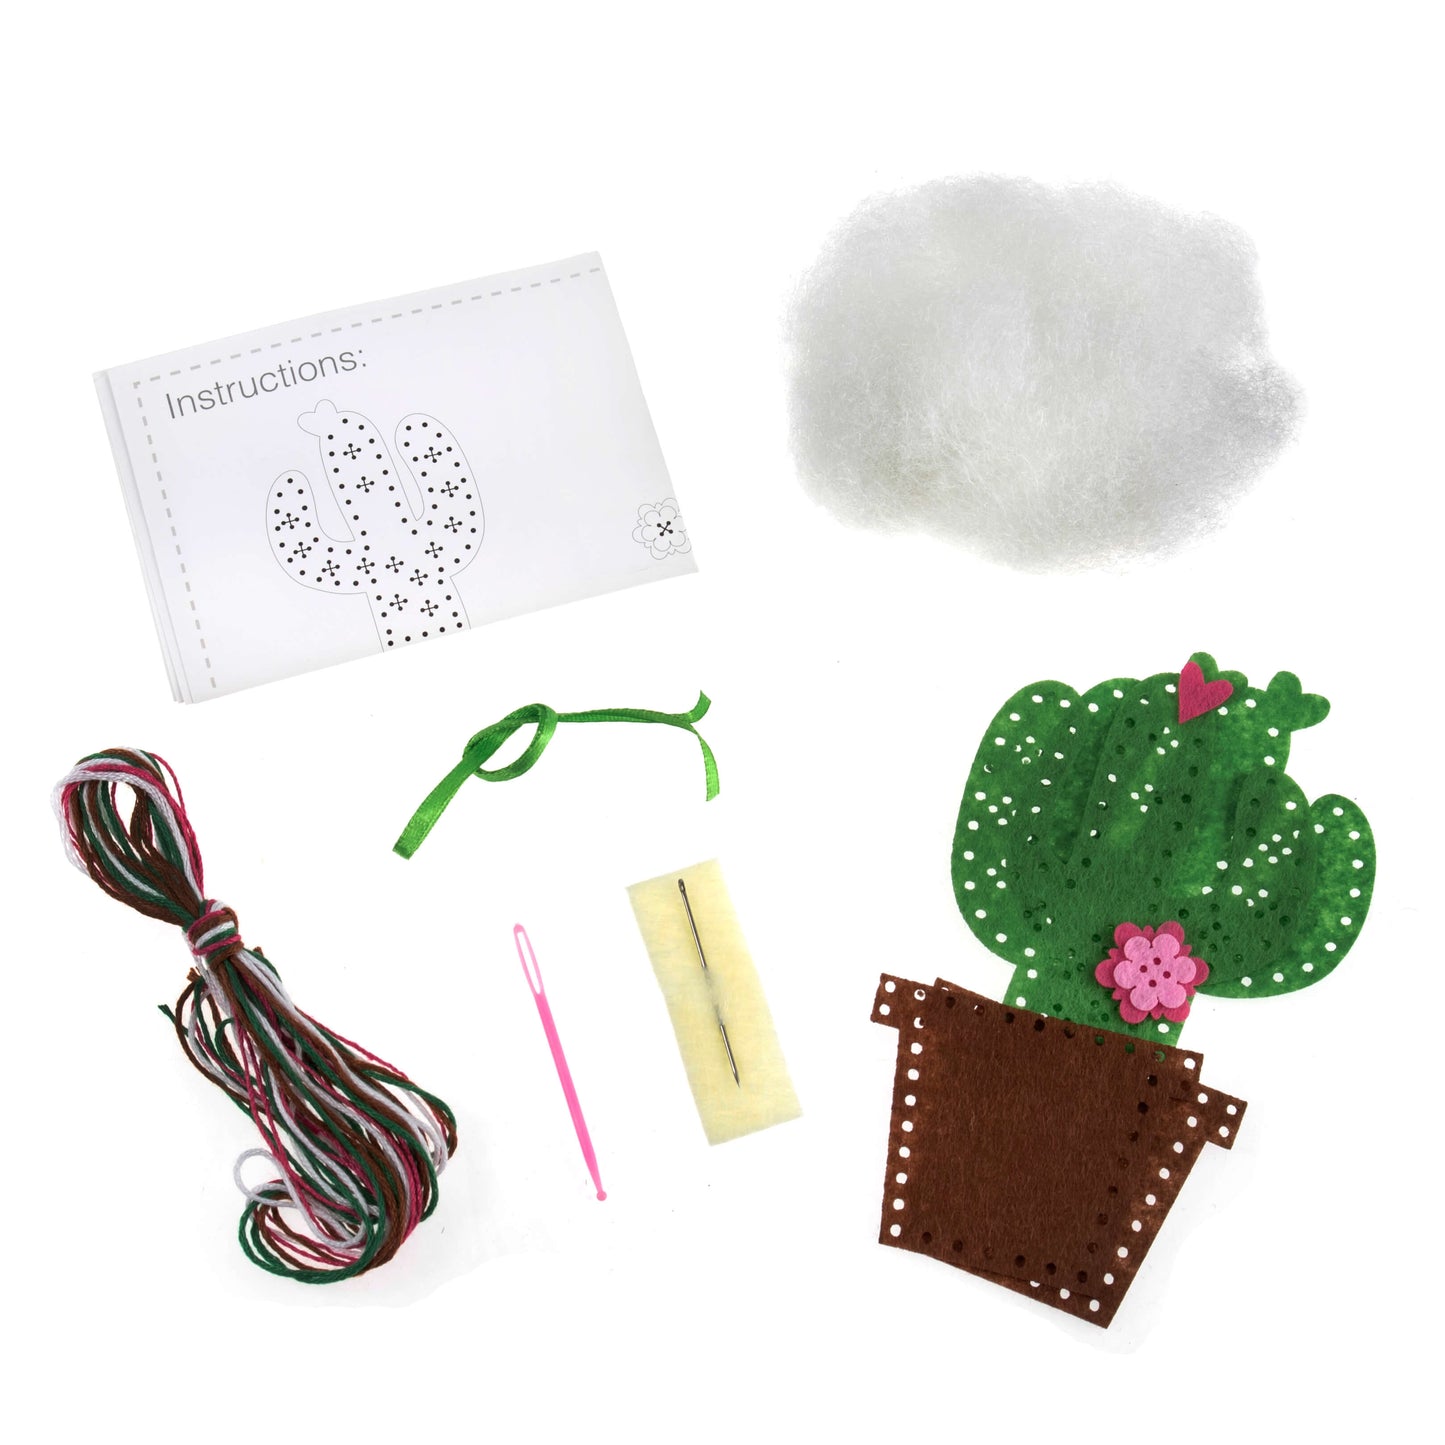 A photo of a felt cactus craft kit, showing a completed cactus in a pot with a flower on top and instructions for making it.